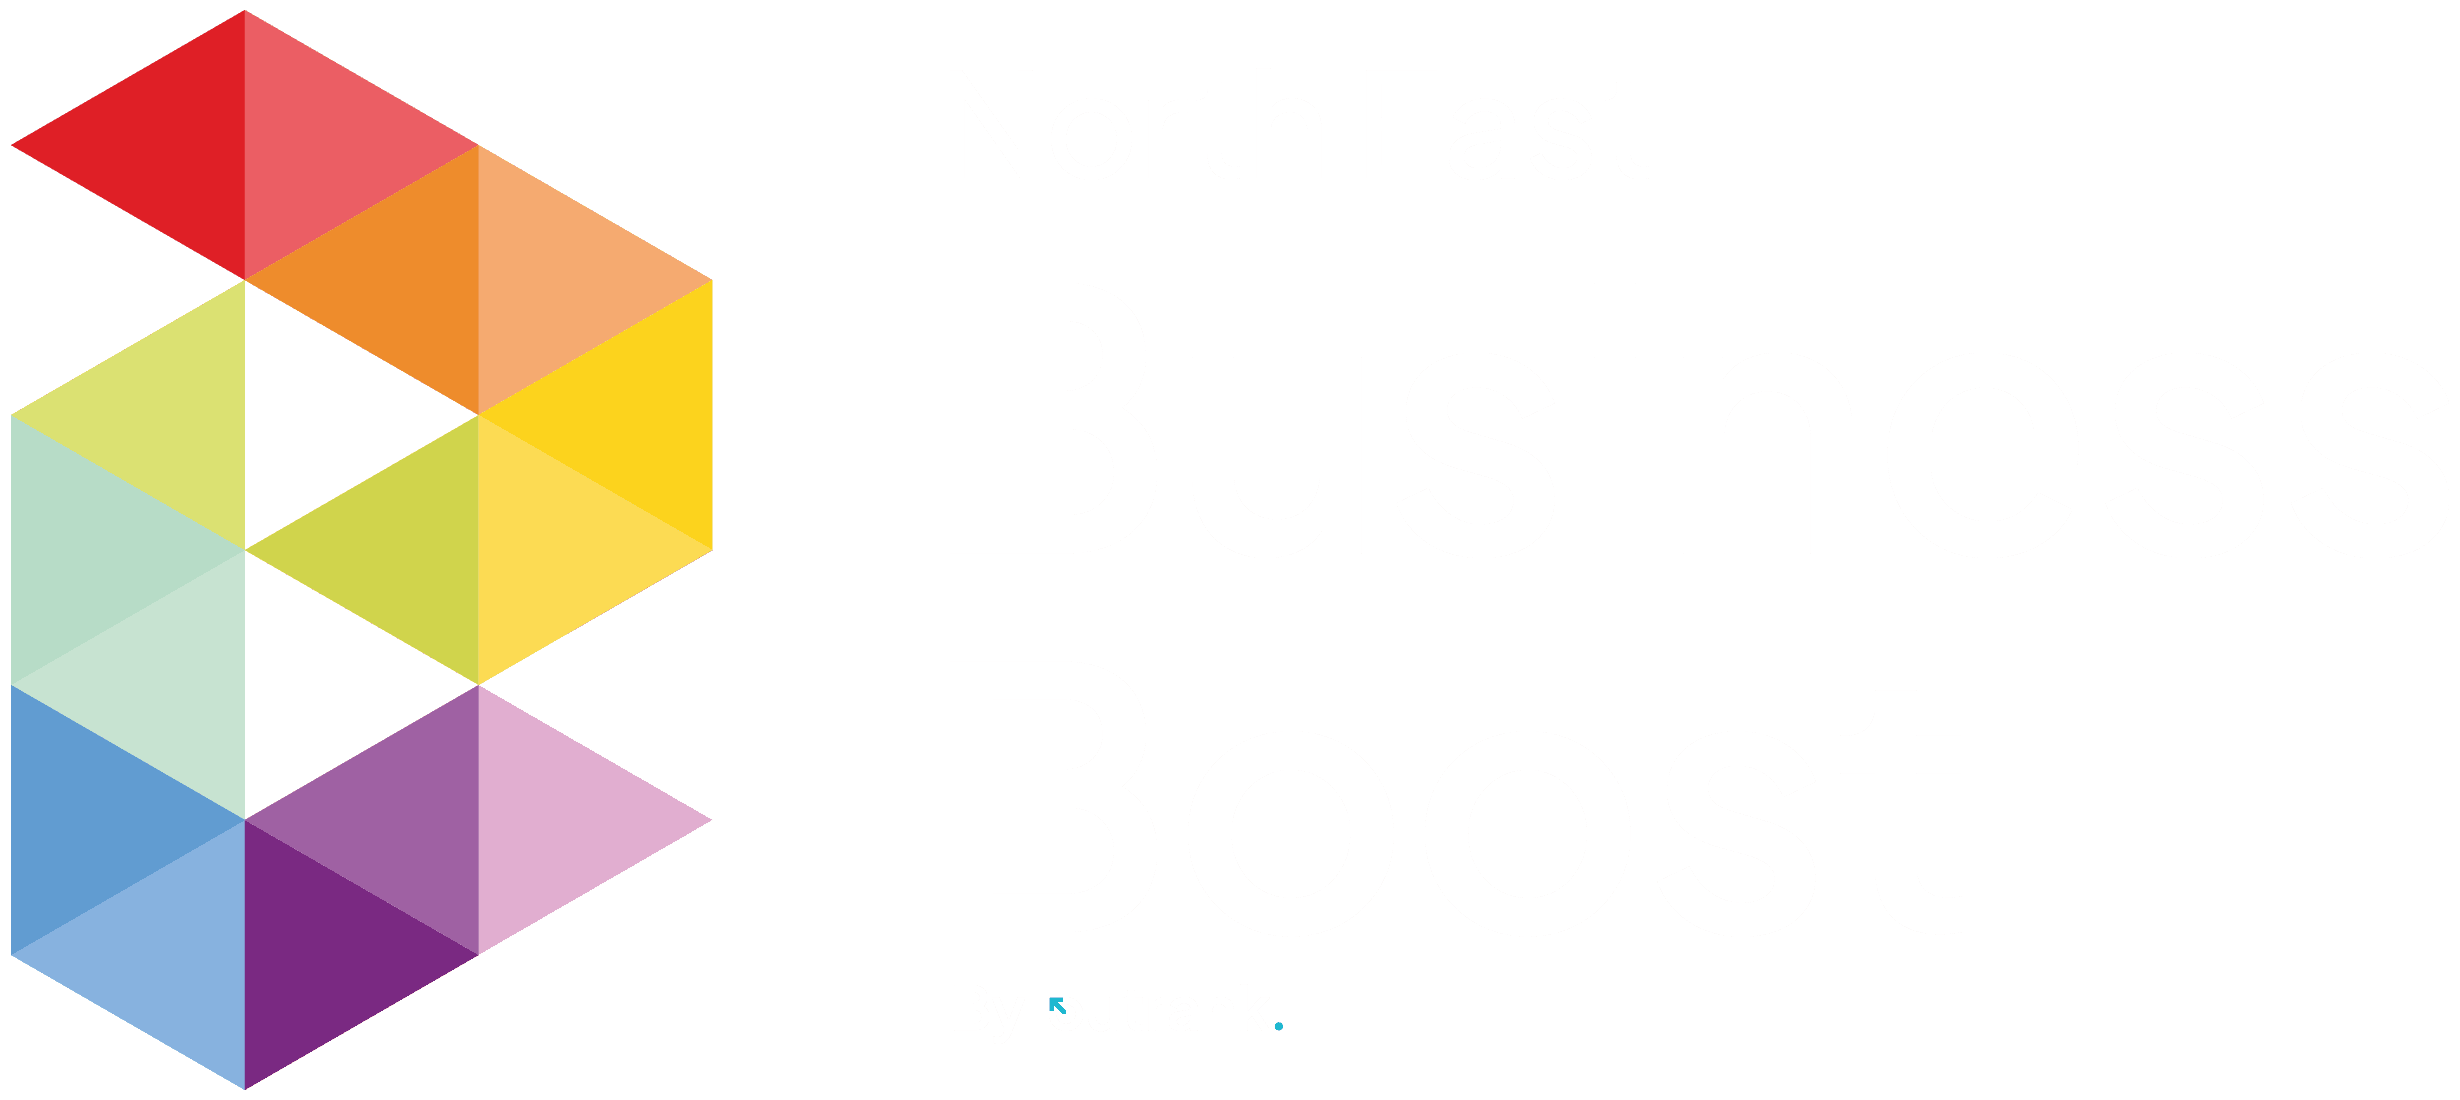 North East Business Boost Logo 3